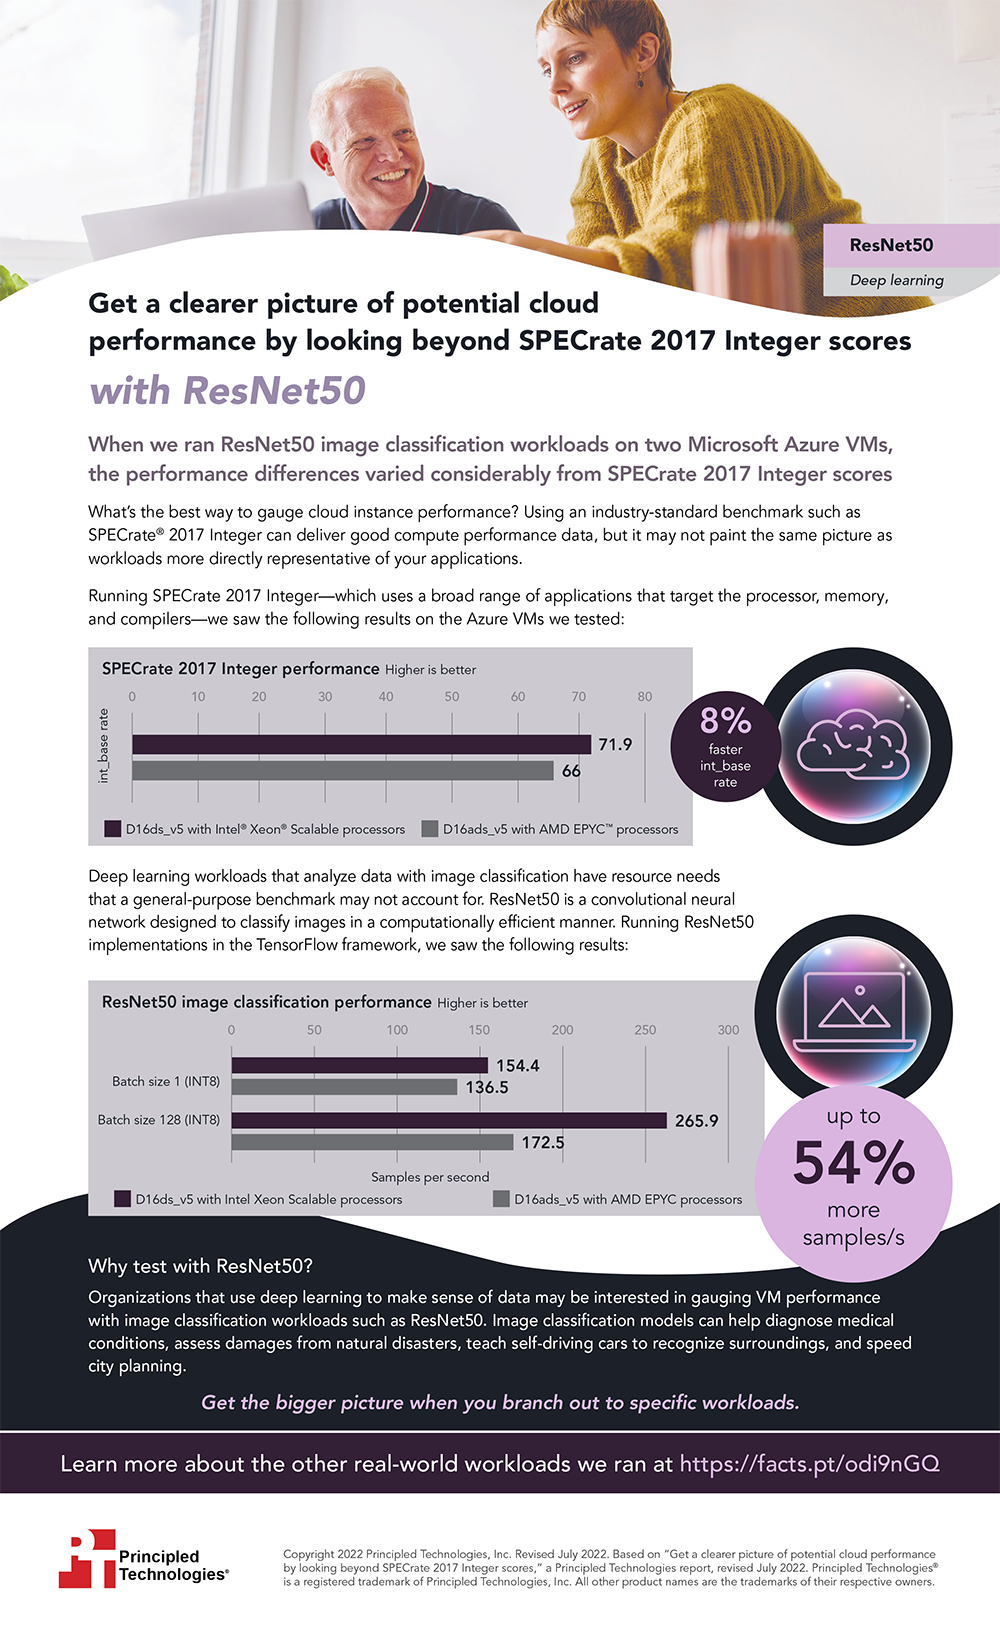  Get a clearer picture of potential cloud performance by looking beyond SPECrate 2017 Integer scores with ResNet50 - Infographic